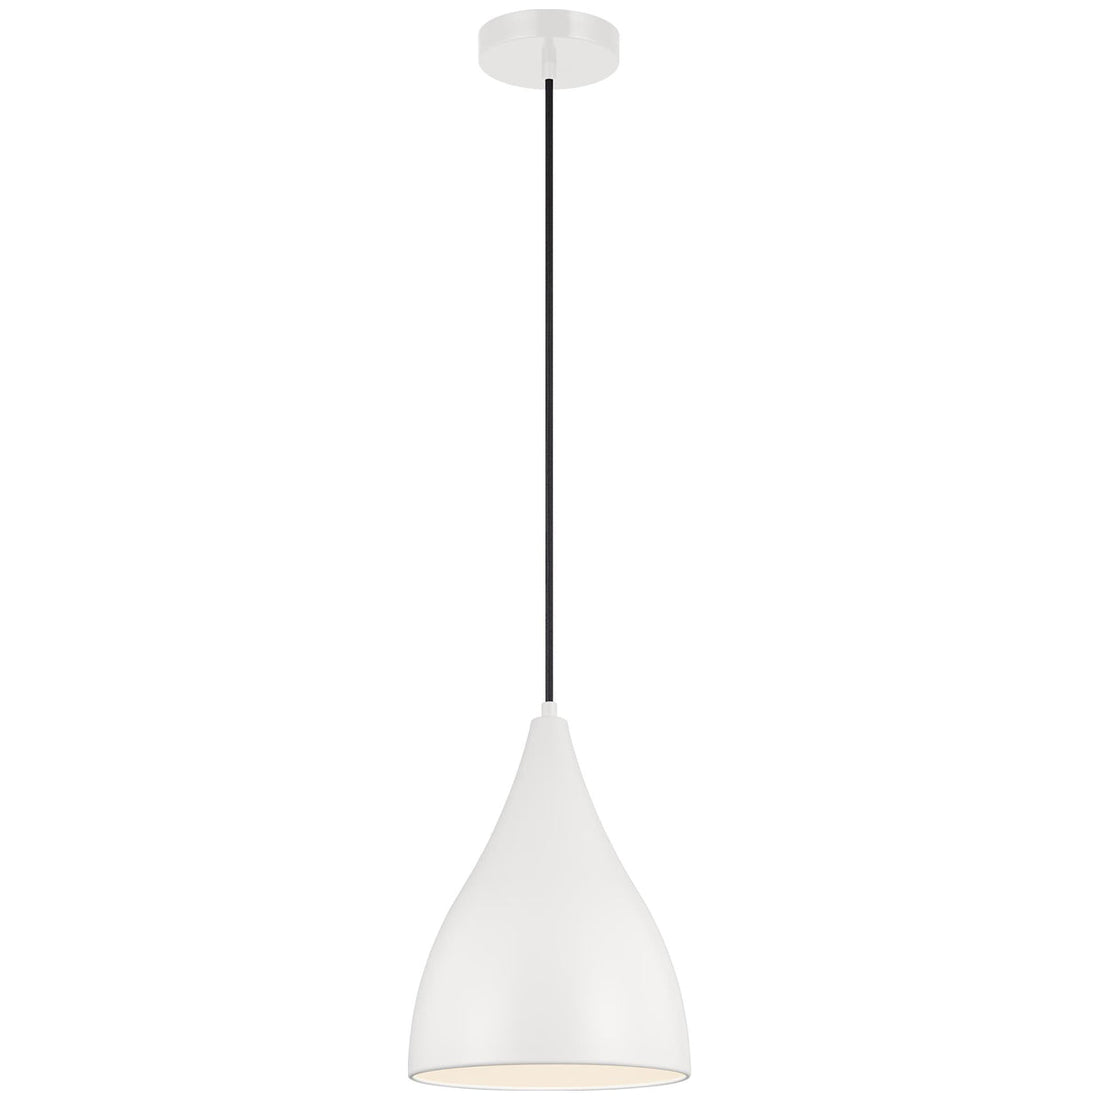 Sea Gull Lighting Oden Small Pendant with Bulb